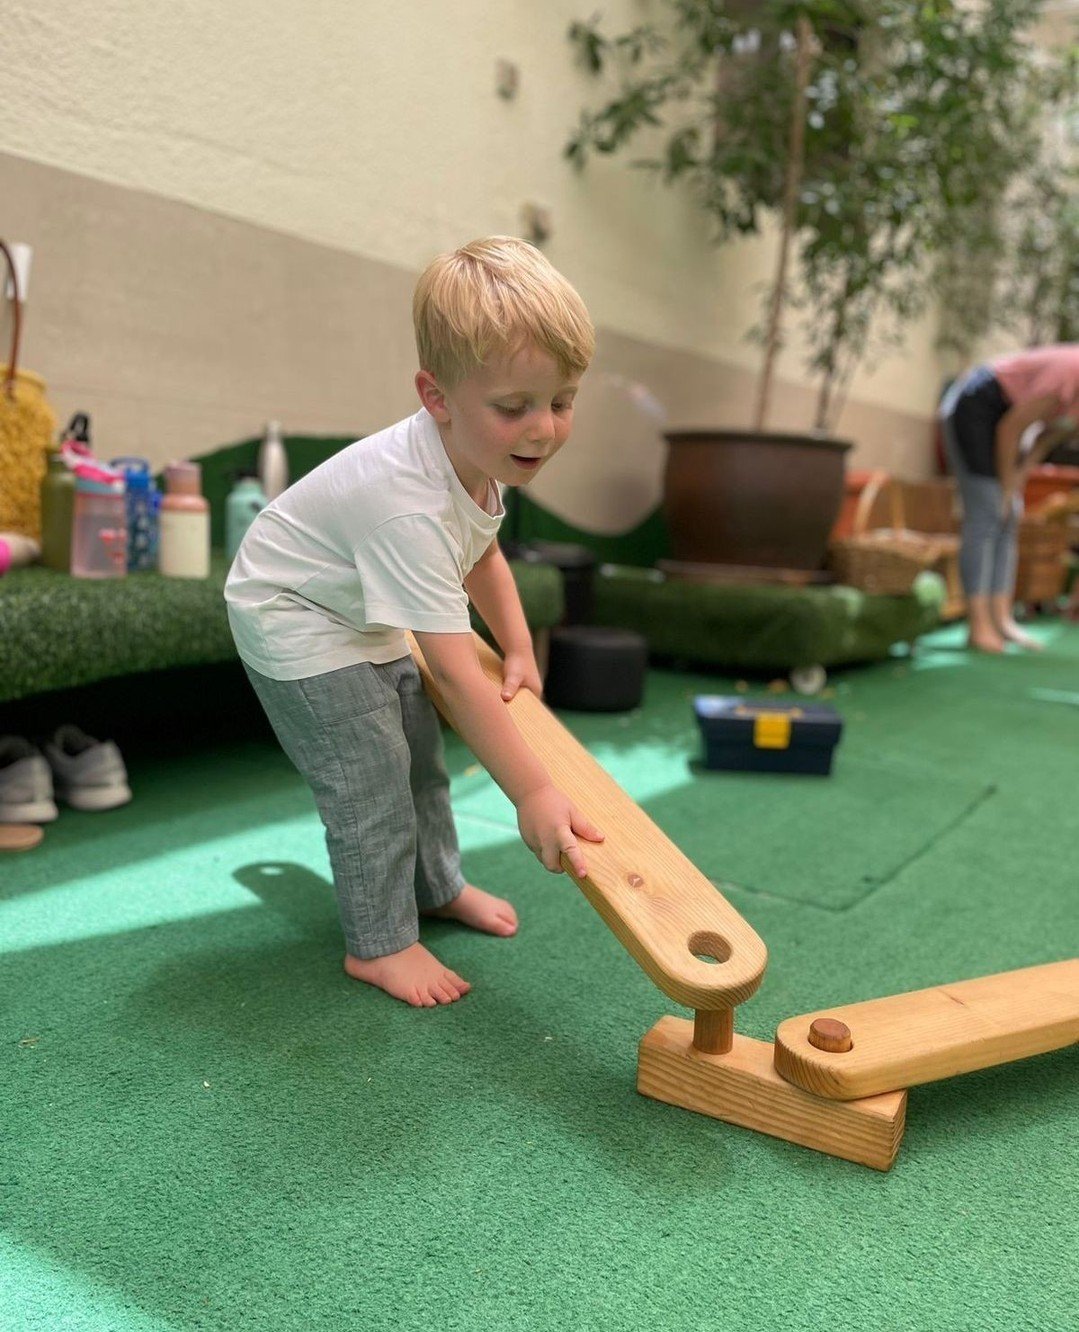 Encouraging independence sometimes means things take longer than we adults like them to take. And that&rsquo;s okay&hellip;at nursery, we have the time to let children do things at their own pace!⁠
⁠
⁠
#inspirephilosophy#learningthroughplay #playbase